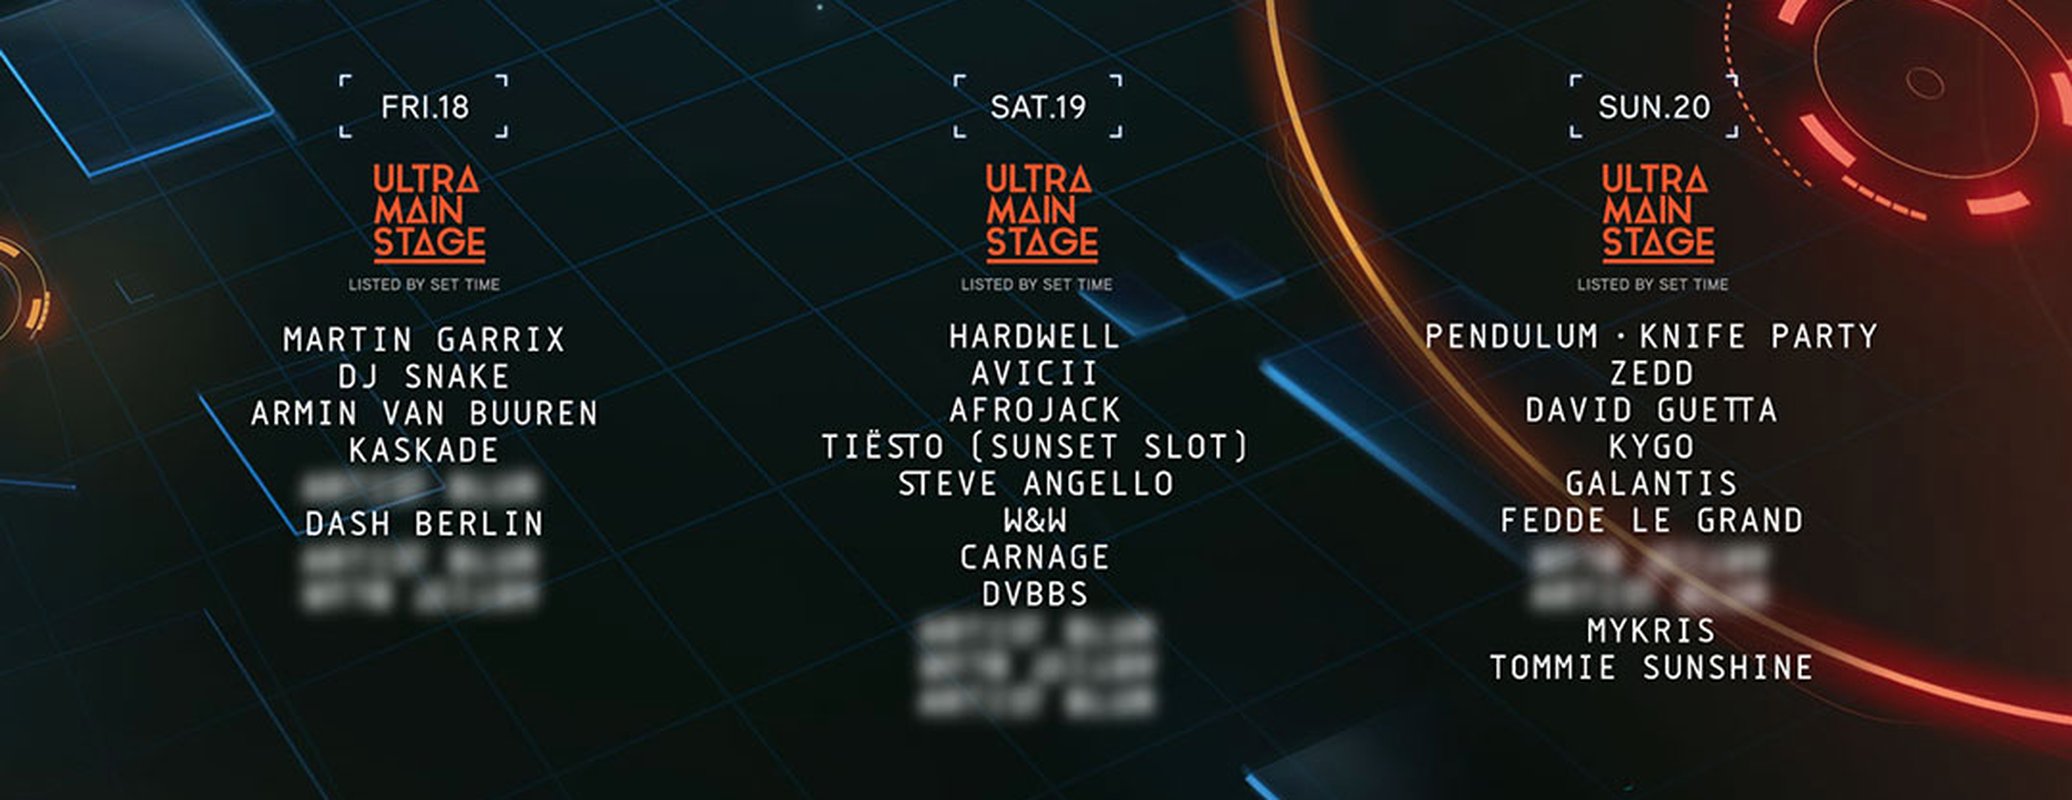 Phase 2 Ultra Main Stage